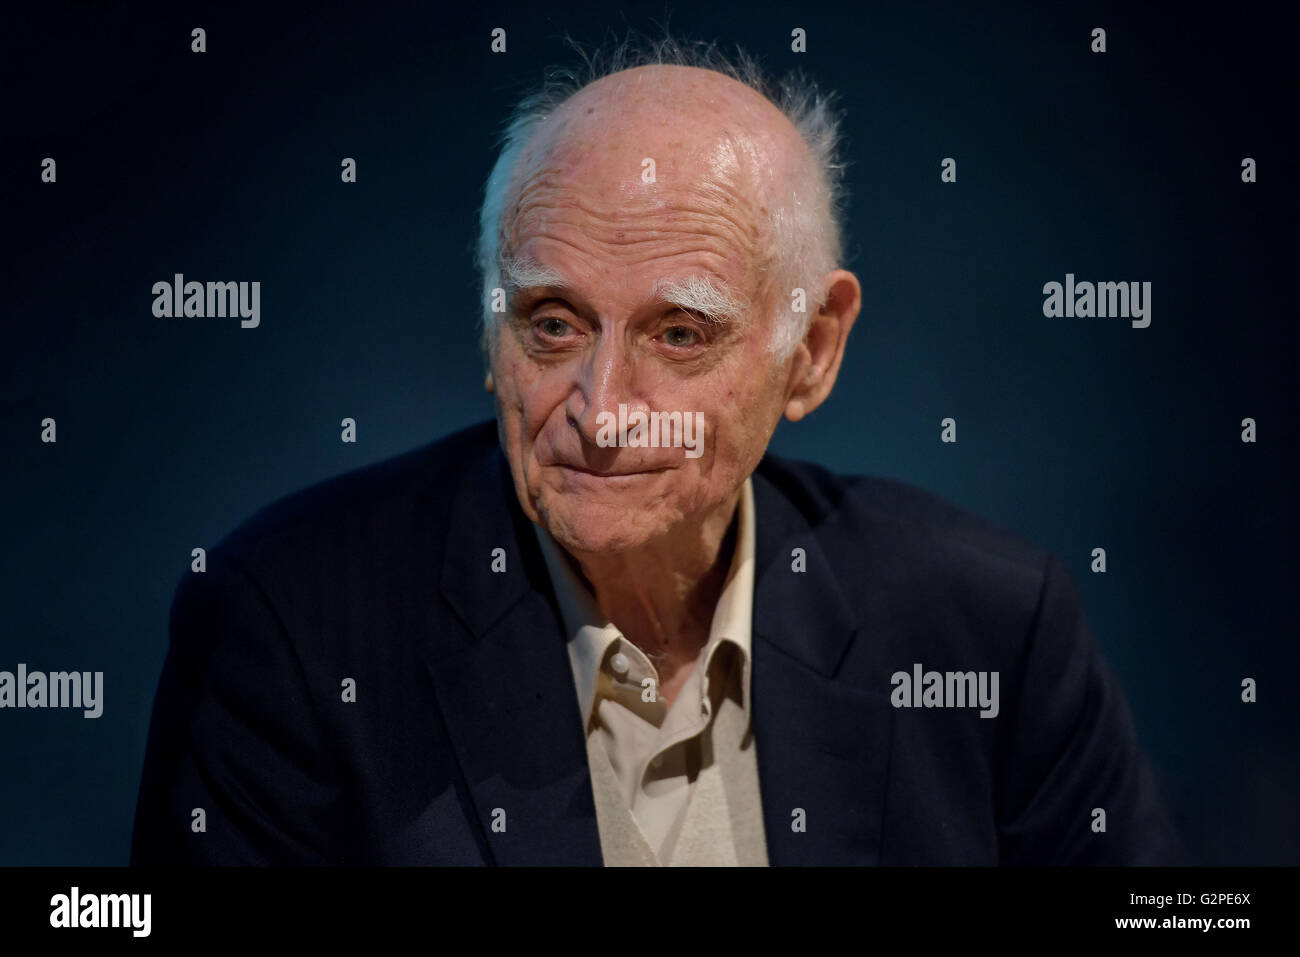 Michel Serres - French philosopher and author. Stock Photo